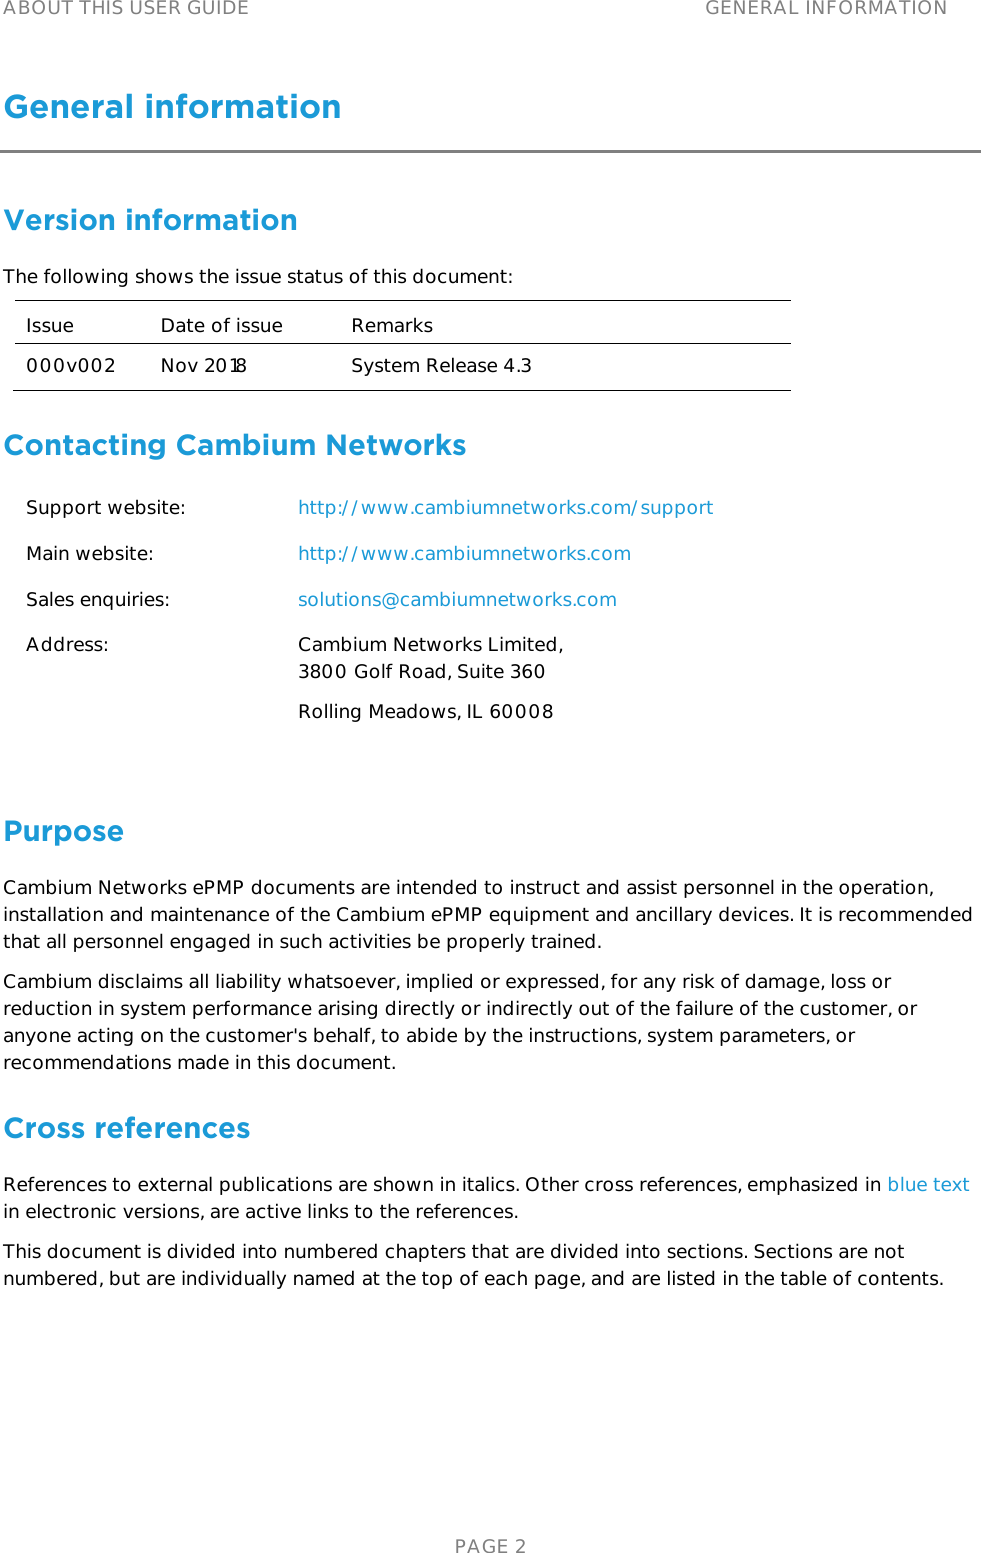 ABOUT THIS USER GUIDE GENERAL INFORMATION   PAGE 2 General information Version information The following shows the issue status of this document: Issue Date of issue Remarks 000v002 Nov 2018 System Release 4.3 Contacting Cambium Networks Support website: http://www.cambiumnetworks.com/support Main website: http://www.cambiumnetworks.com Sales enquiries: solutions@cambiumnetworks.com Address: Cambium Networks Limited, 3800 Golf Road, Suite 360 Rolling Meadows, IL 60008  Purpose Cambium Networks ePMP documents are intended to instruct and assist personnel in the operation, installation and maintenance of the Cambium ePMP equipment and ancillary devices. It is recommended that all personnel engaged in such activities be properly trained. Cambium disclaims all liability whatsoever, implied or expressed, for any risk of damage, loss or reduction in system performance arising directly or indirectly out of the failure of the customer, or anyone acting on the customer&apos;s behalf, to abide by the instructions, system parameters, or recommendations made in this document. Cross references References to external publications are shown in italics. Other cross references, emphasized in blue text in electronic versions, are active links to the references. This document is divided into numbered chapters that are divided into sections. Sections are not numbered, but are individually named at the top of each page, and are listed in the table of contents. 